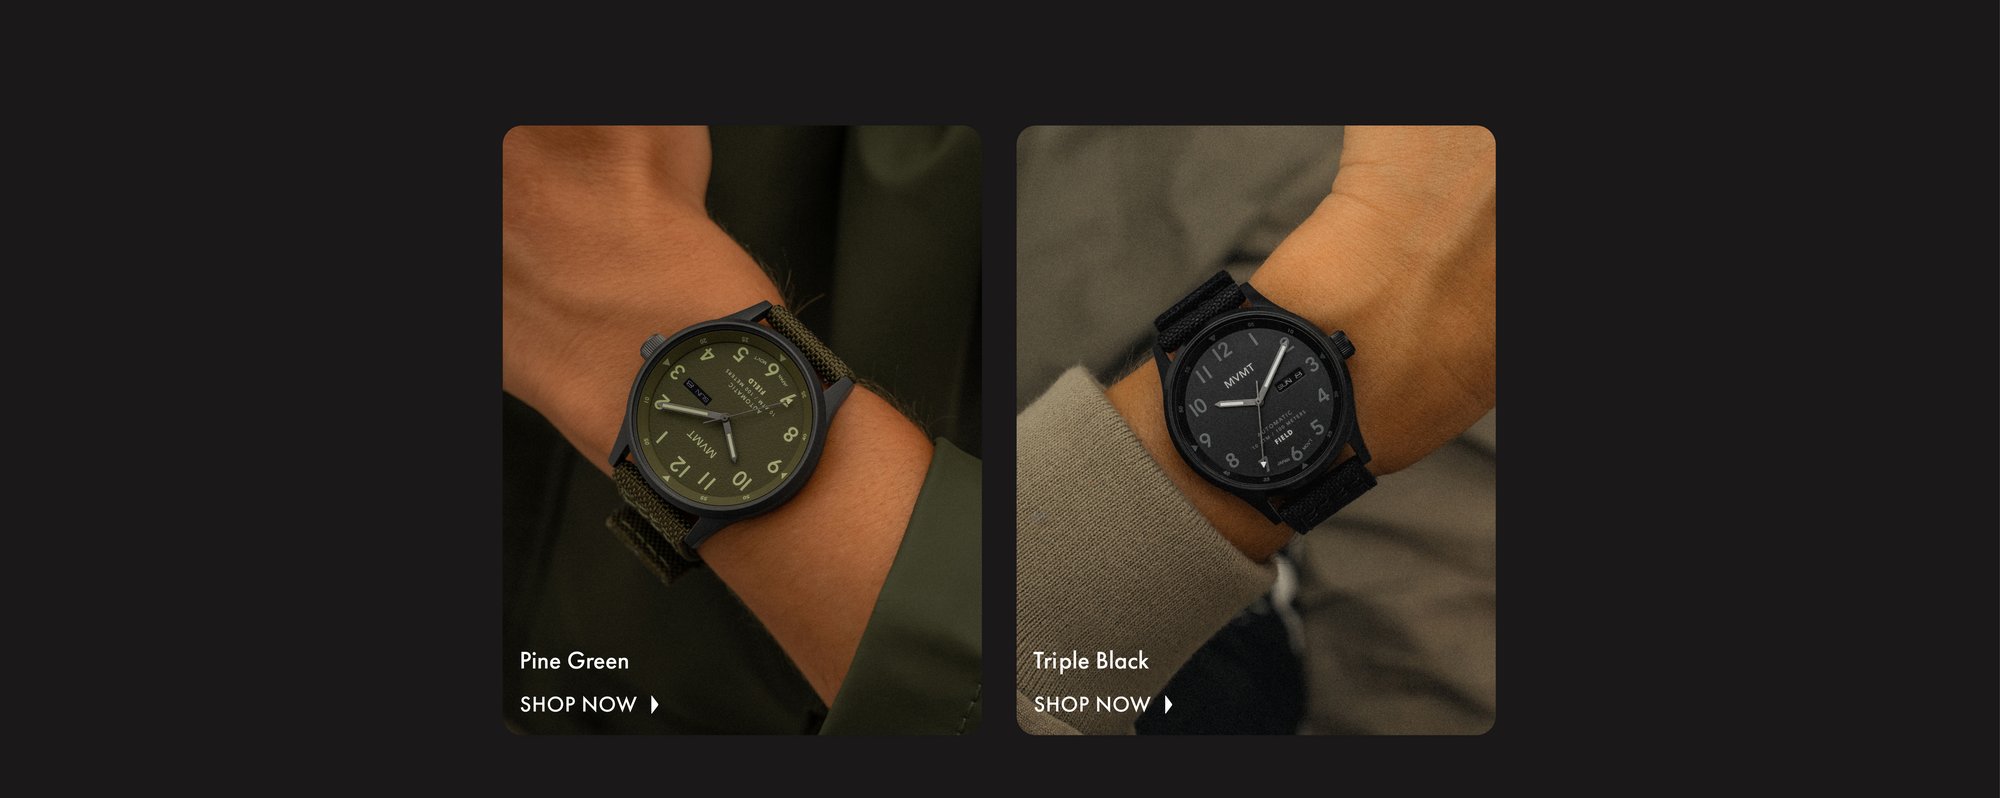 MVMT Field watches in Pine Green and Tripple Black